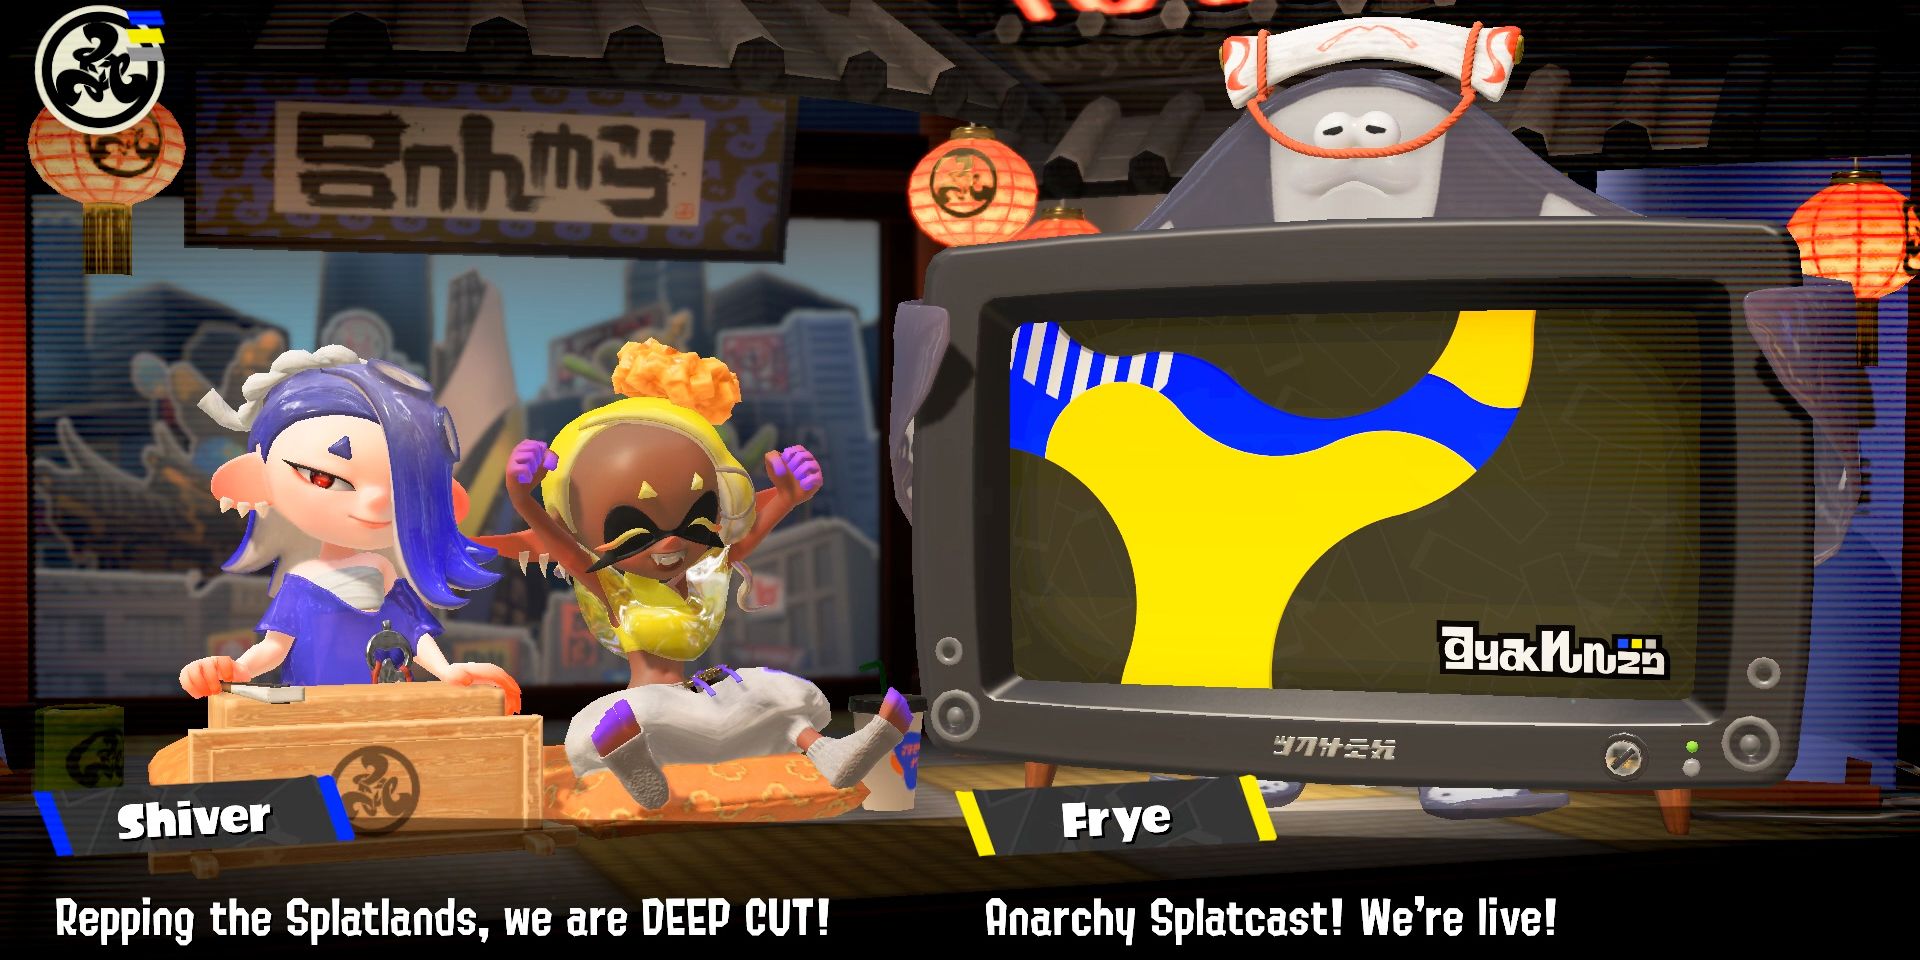 Splatoon 3's Anarchy Splatcast, hosted by Deep Cut, won't interrupt gameplay or force players to watch the news.